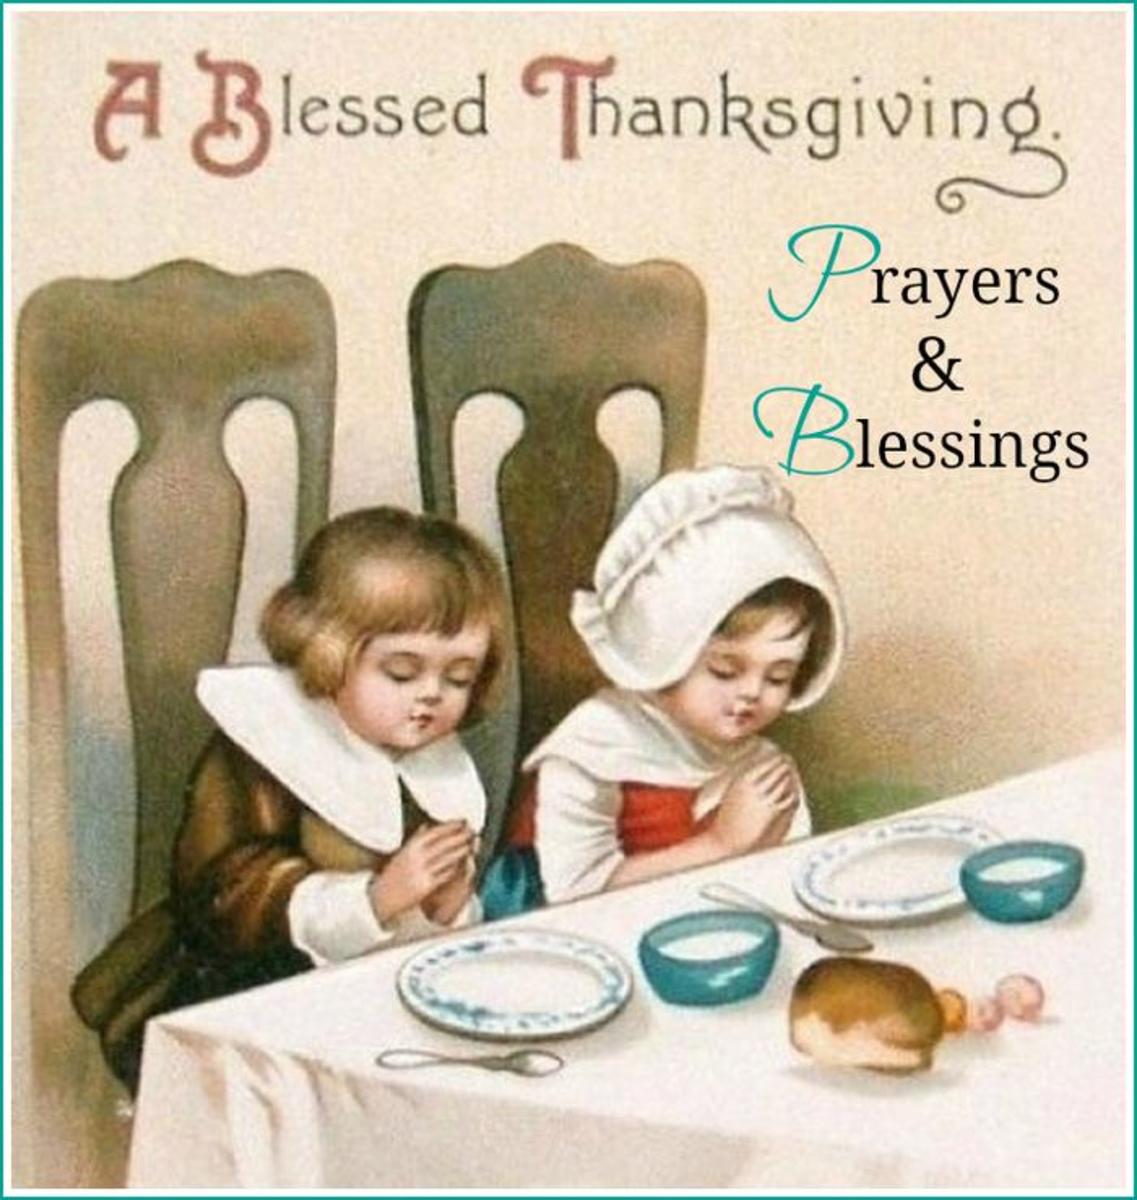 Thanksgiving Prayers and Blessings